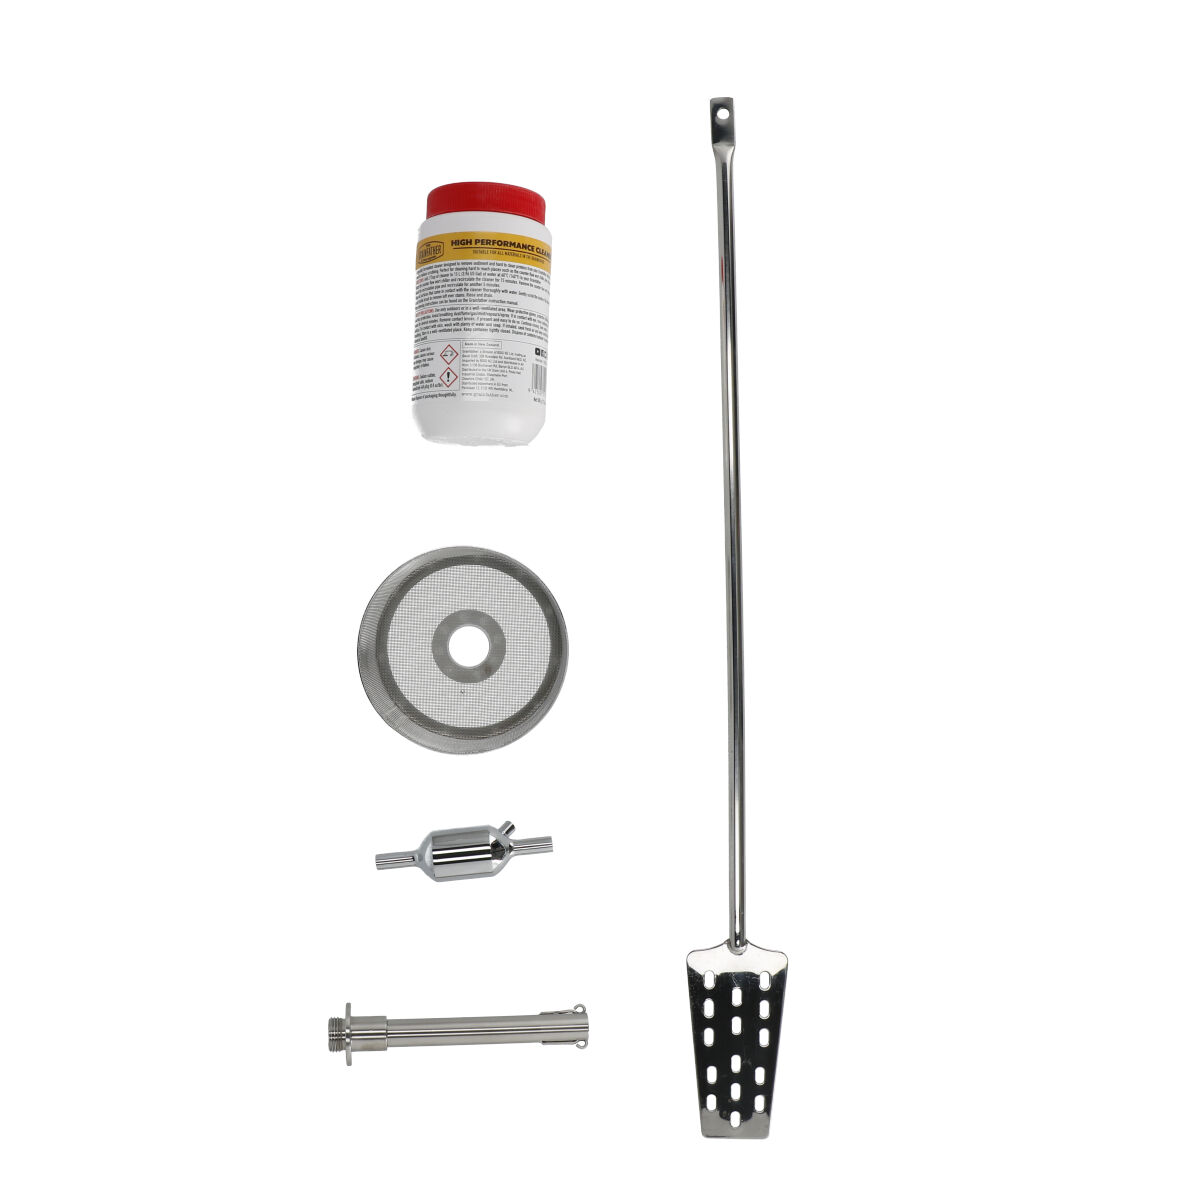 Grainfather G30 Connect - Accessory Kit